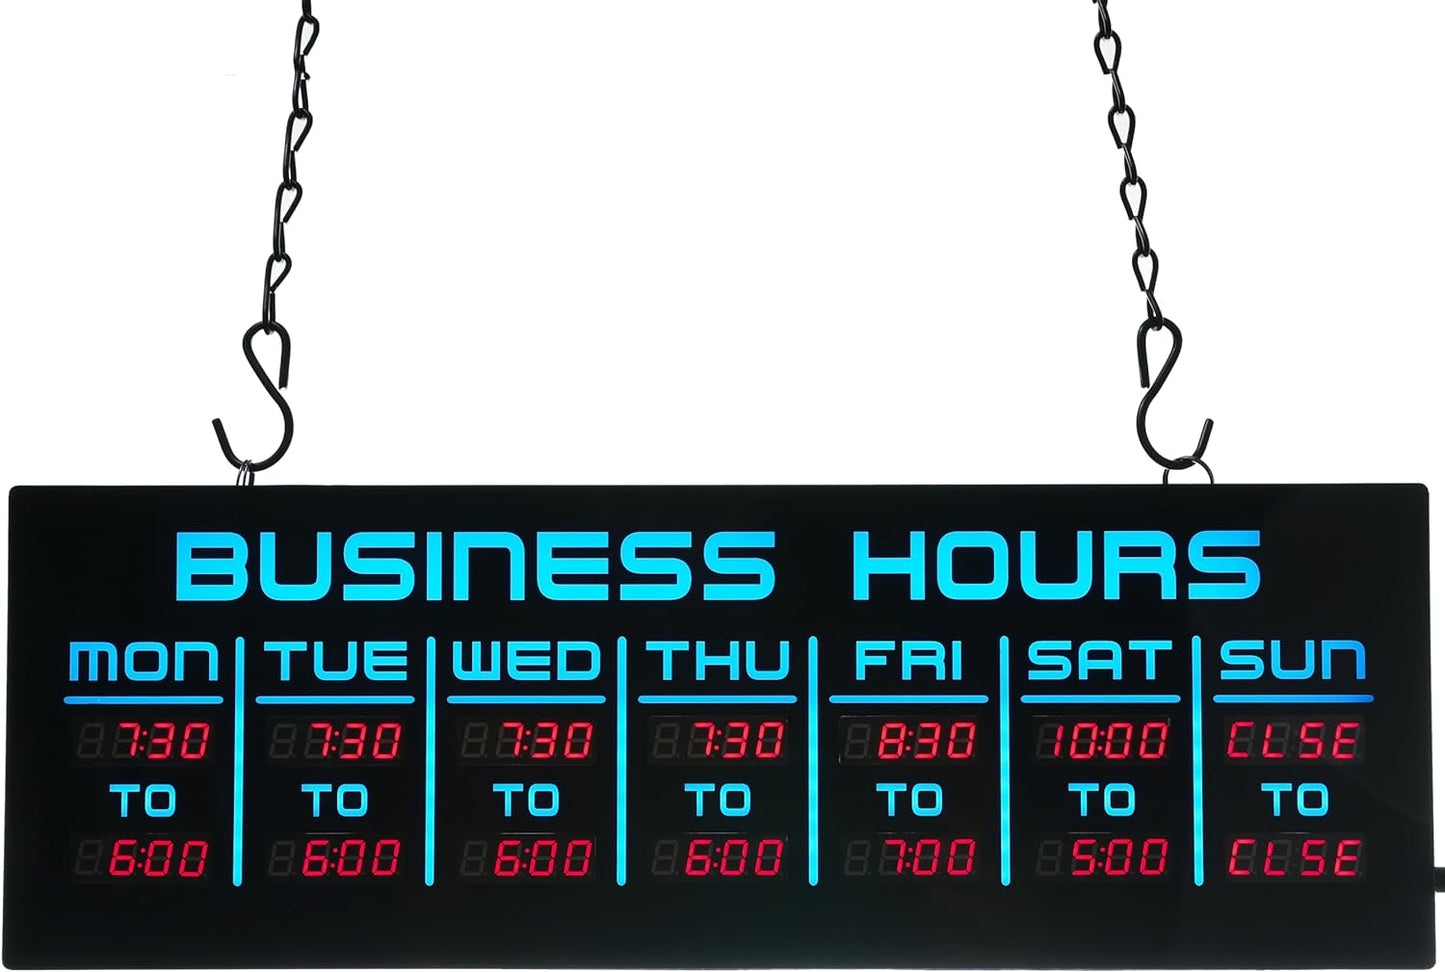 Digital Business Hours Sign by ELEMENT LUX - Electronic Programmable Business Hours of Operation Open Signs with Ultr